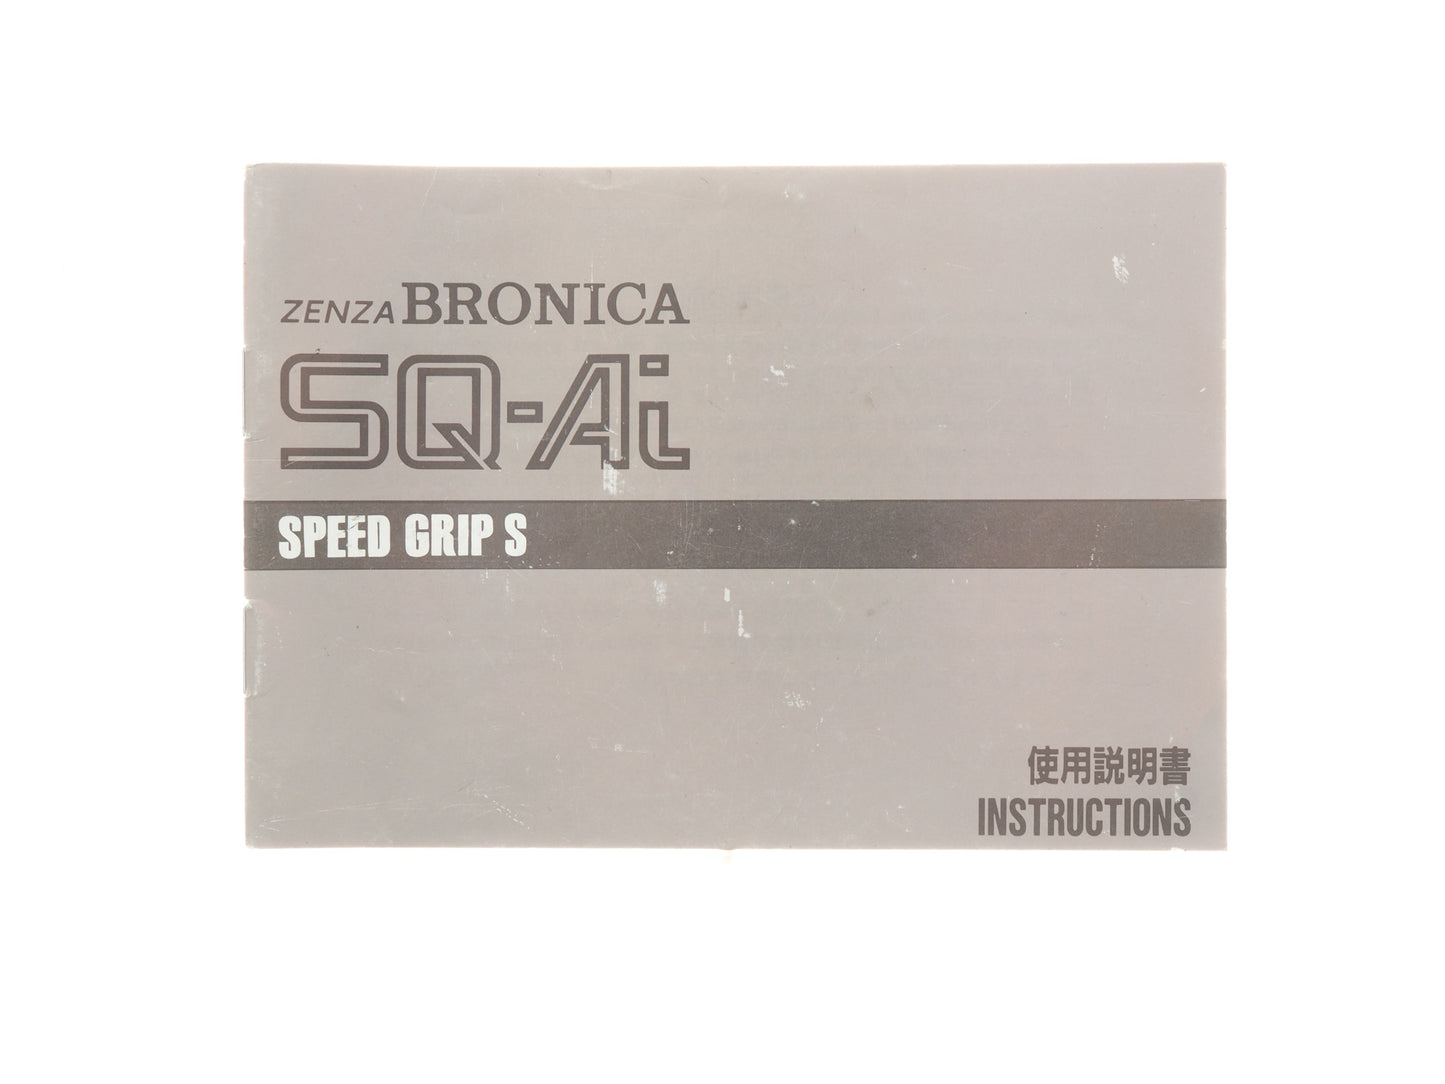 Zenza Bronica SQ-Ai Speed Grip S Instructions